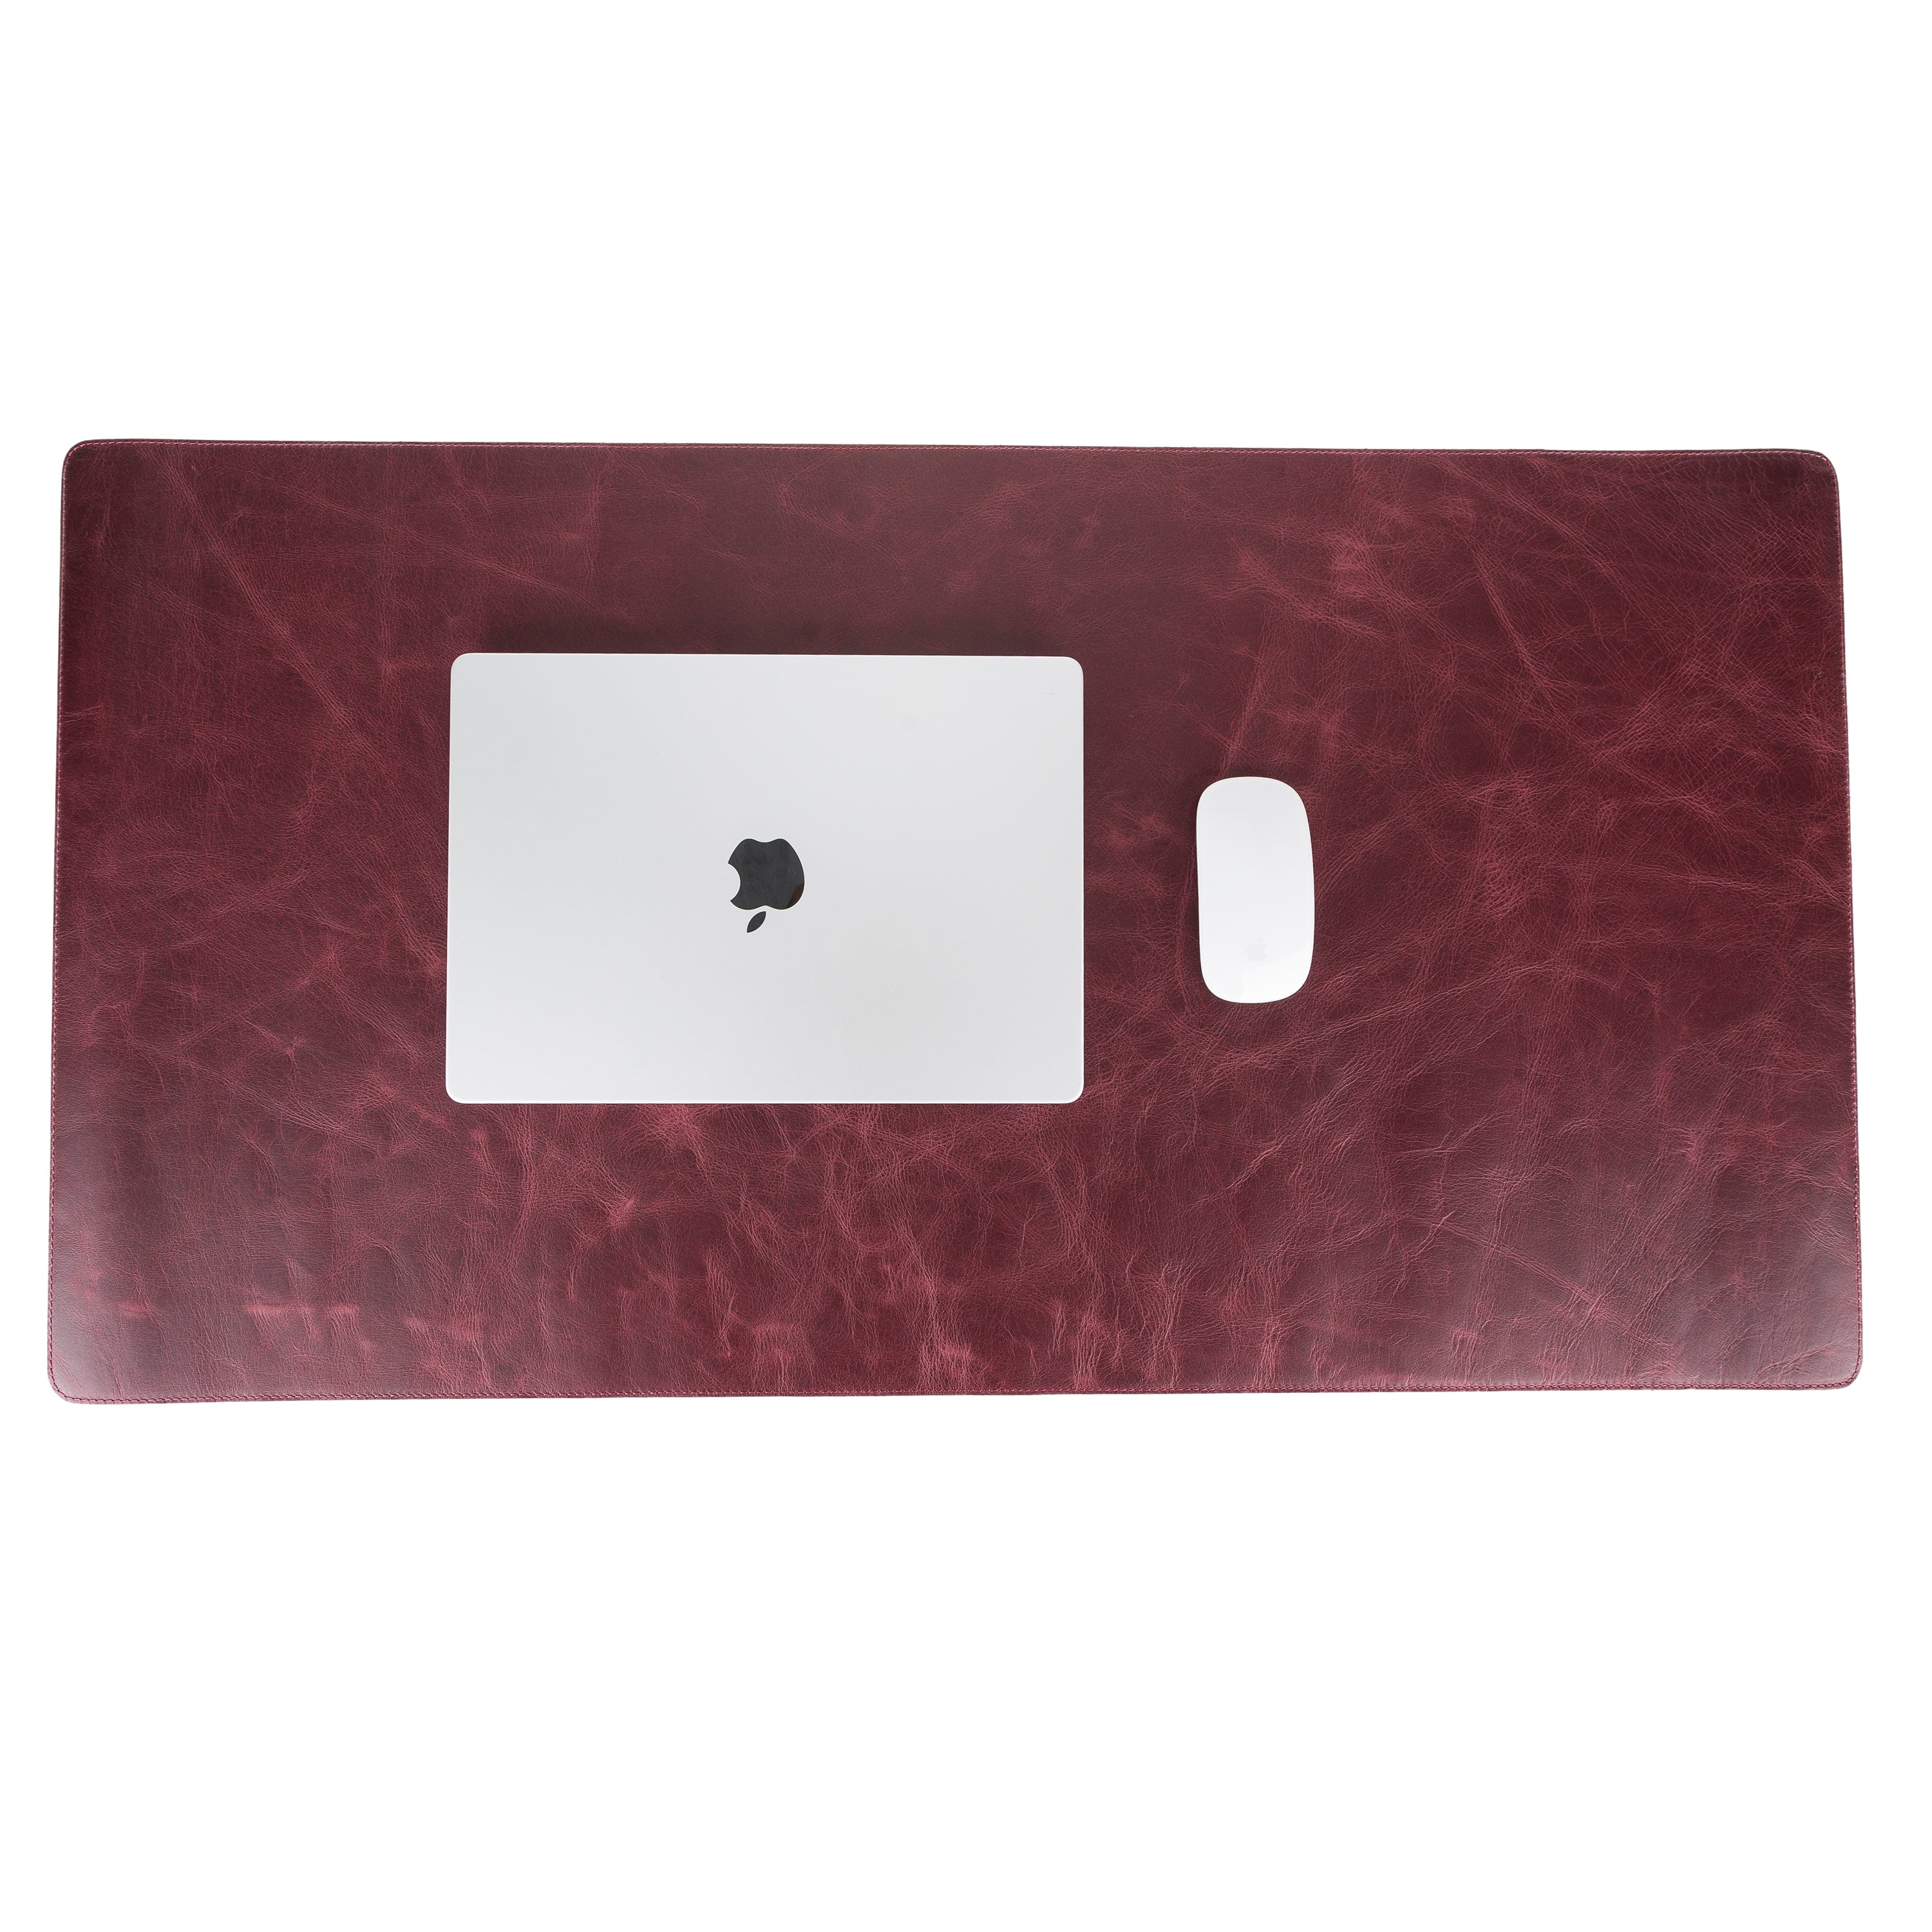 LupinnyLeather Genuine Cherry Leather Deskmat, Computer Pad, Office Desk Pad 6